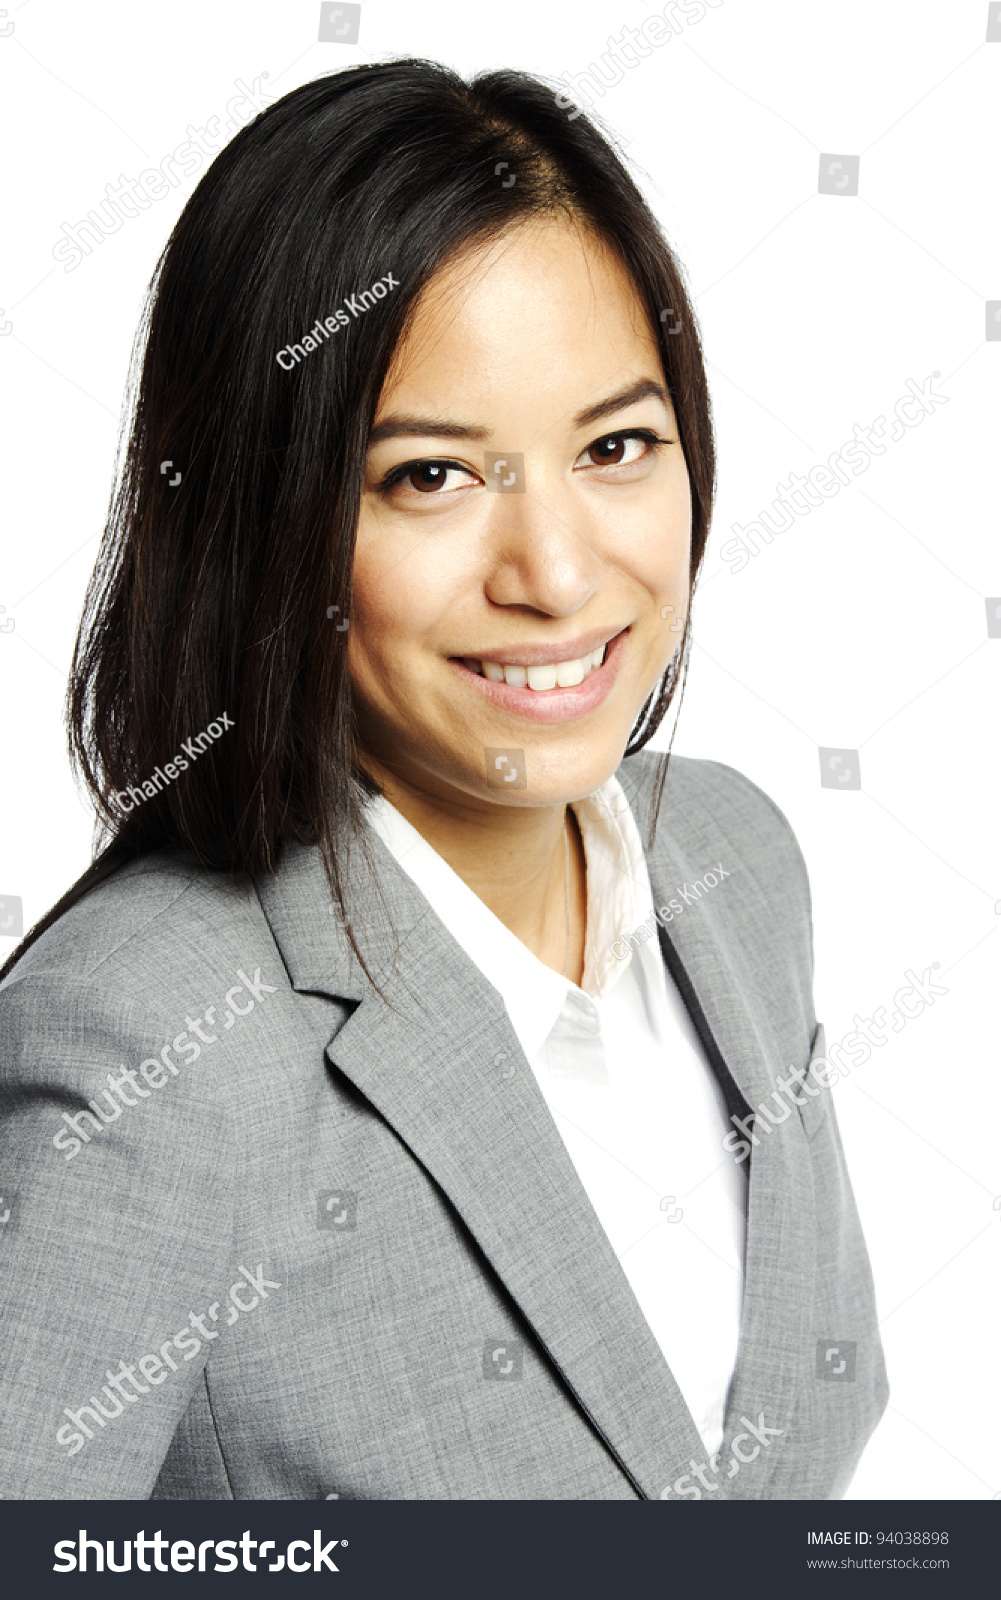 Headshot Of Asian Business Woman Smiling For Camera Stock Photo ...